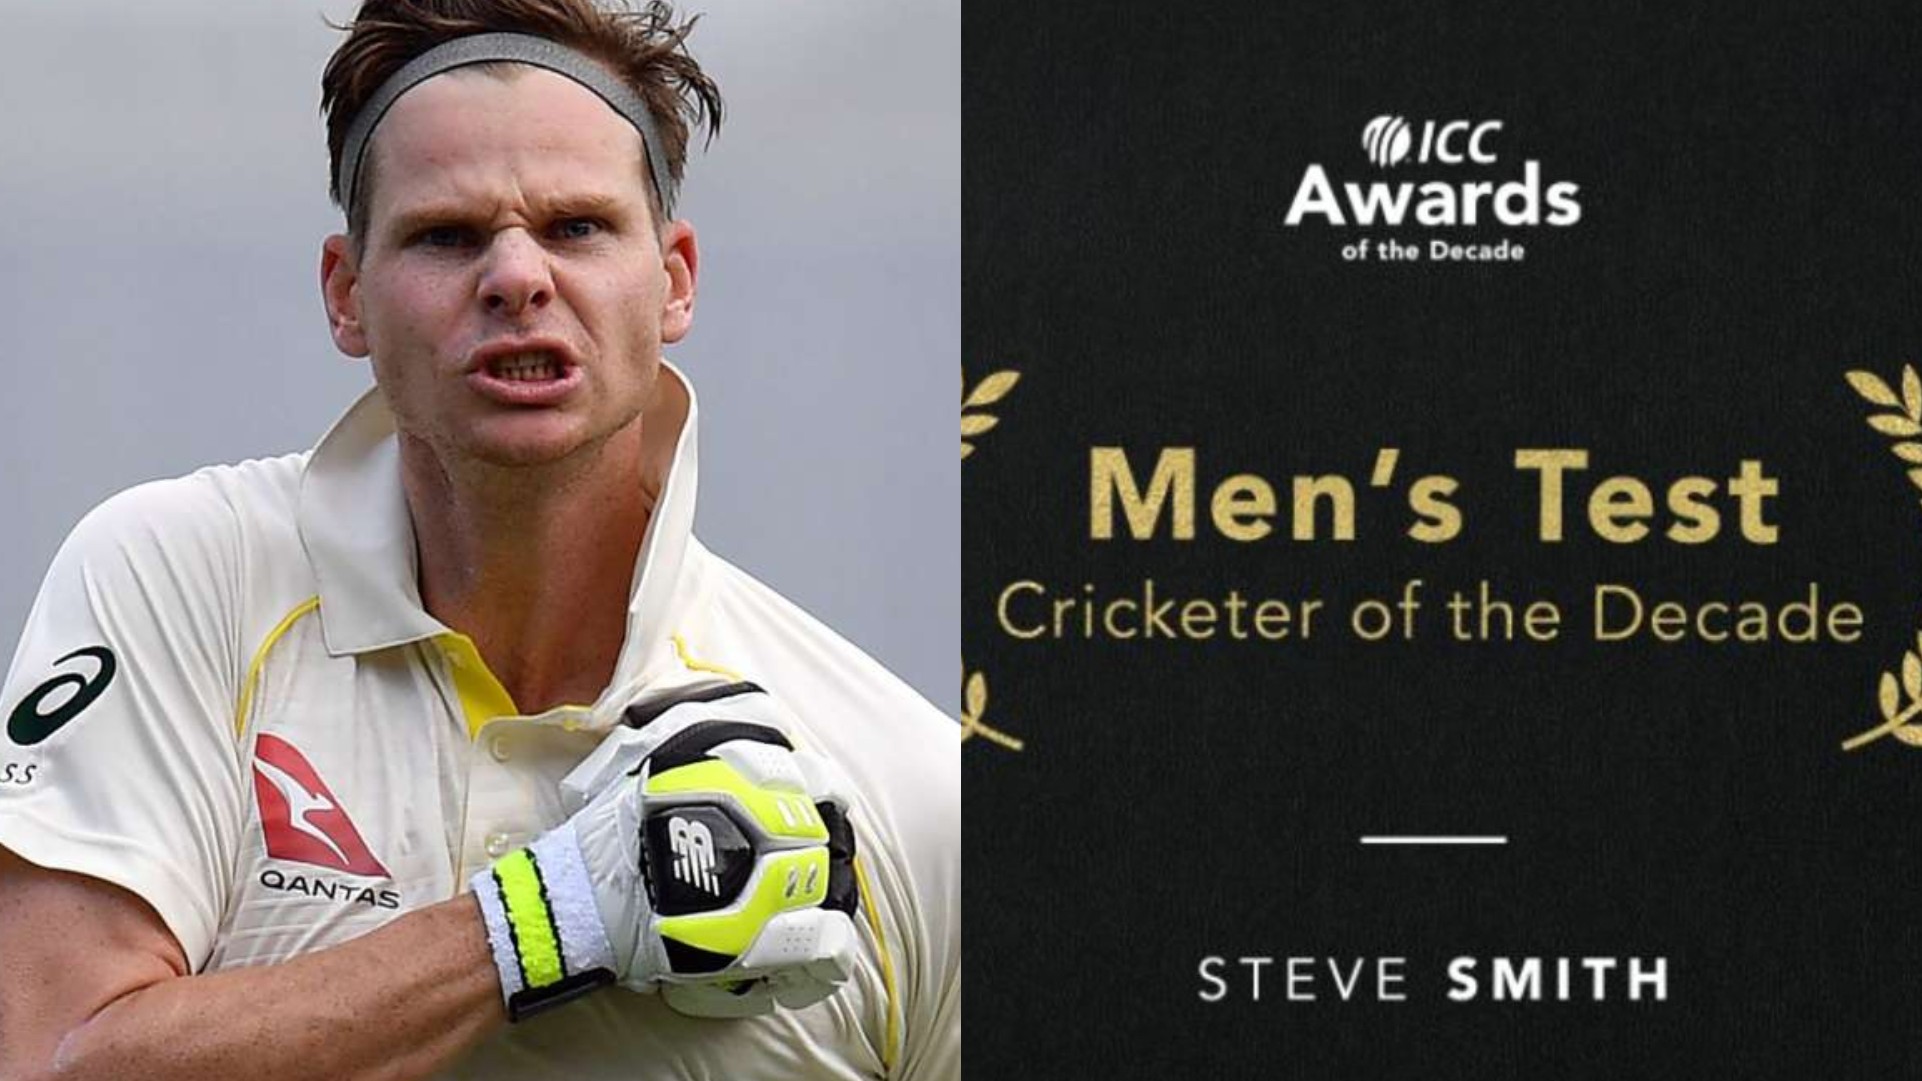 Steve Smith wins the ICC Test cricketer of the decade award